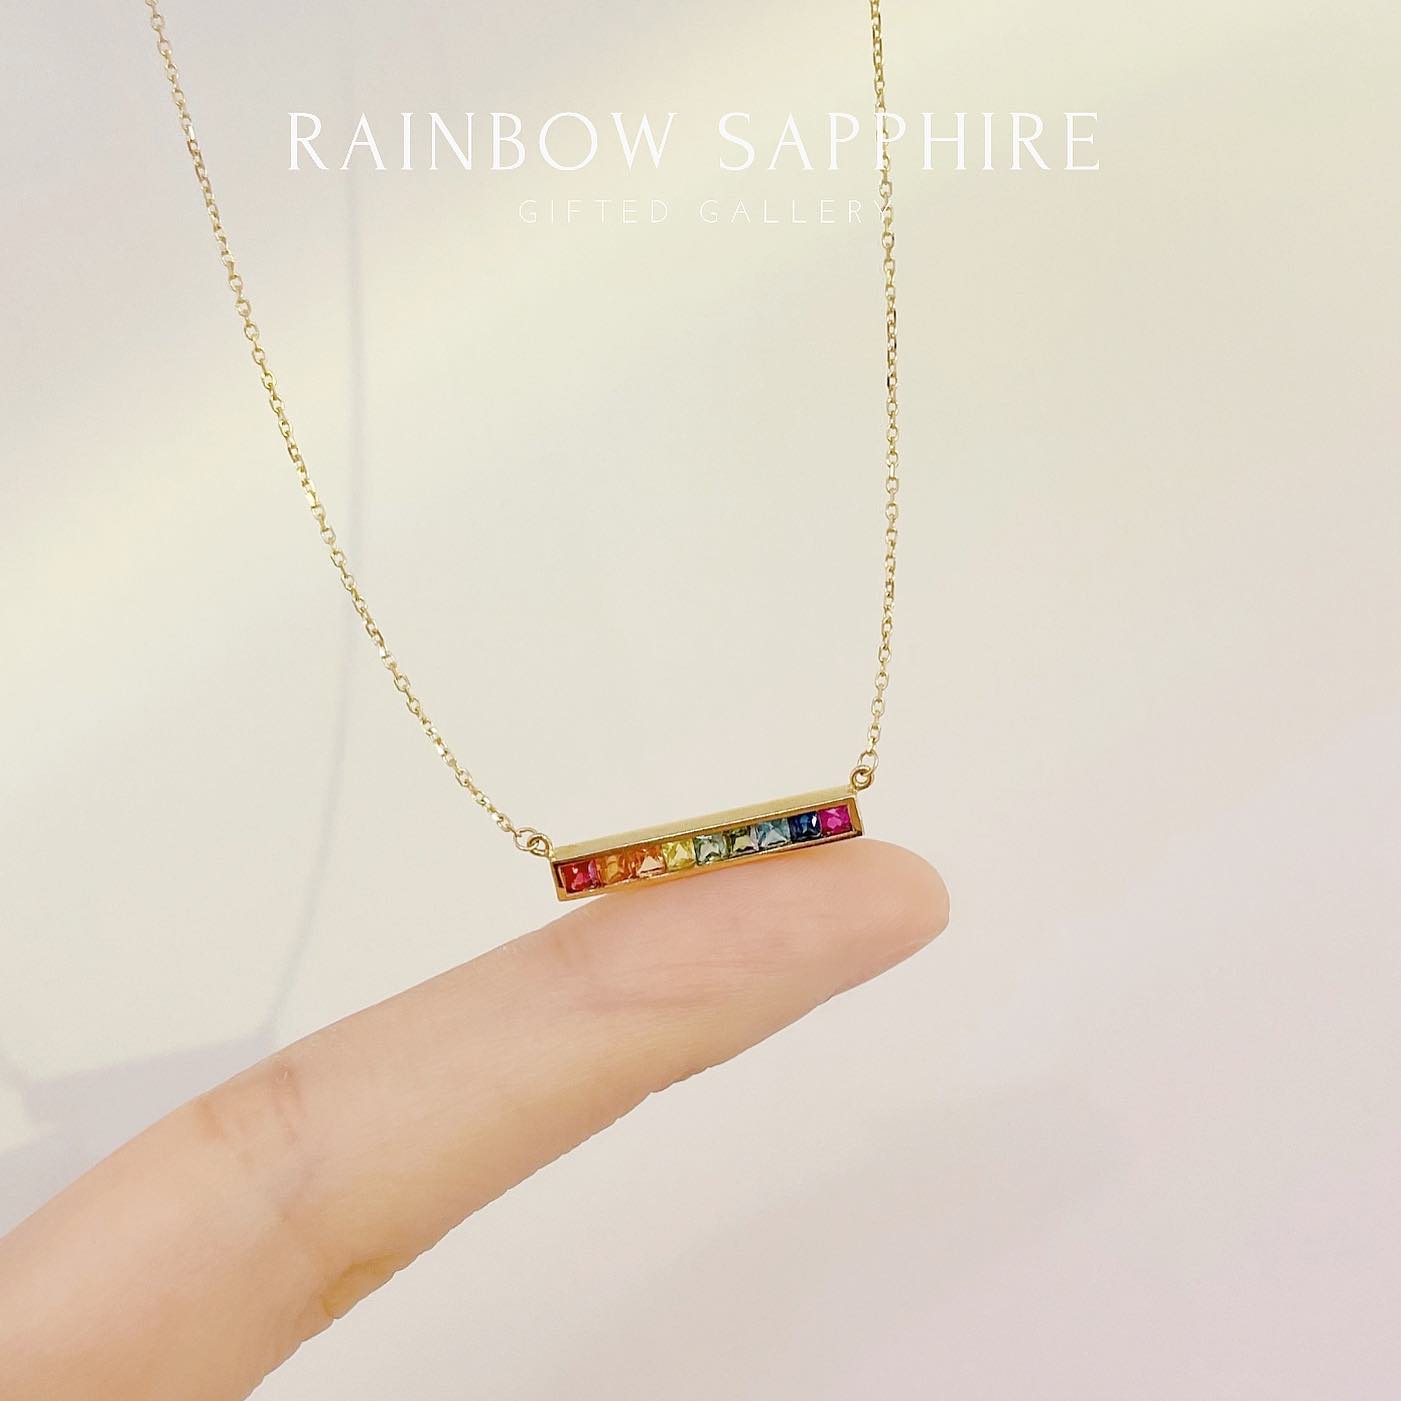 Sold＊Rainbow Sapphire Necklace by Gifted Gallery